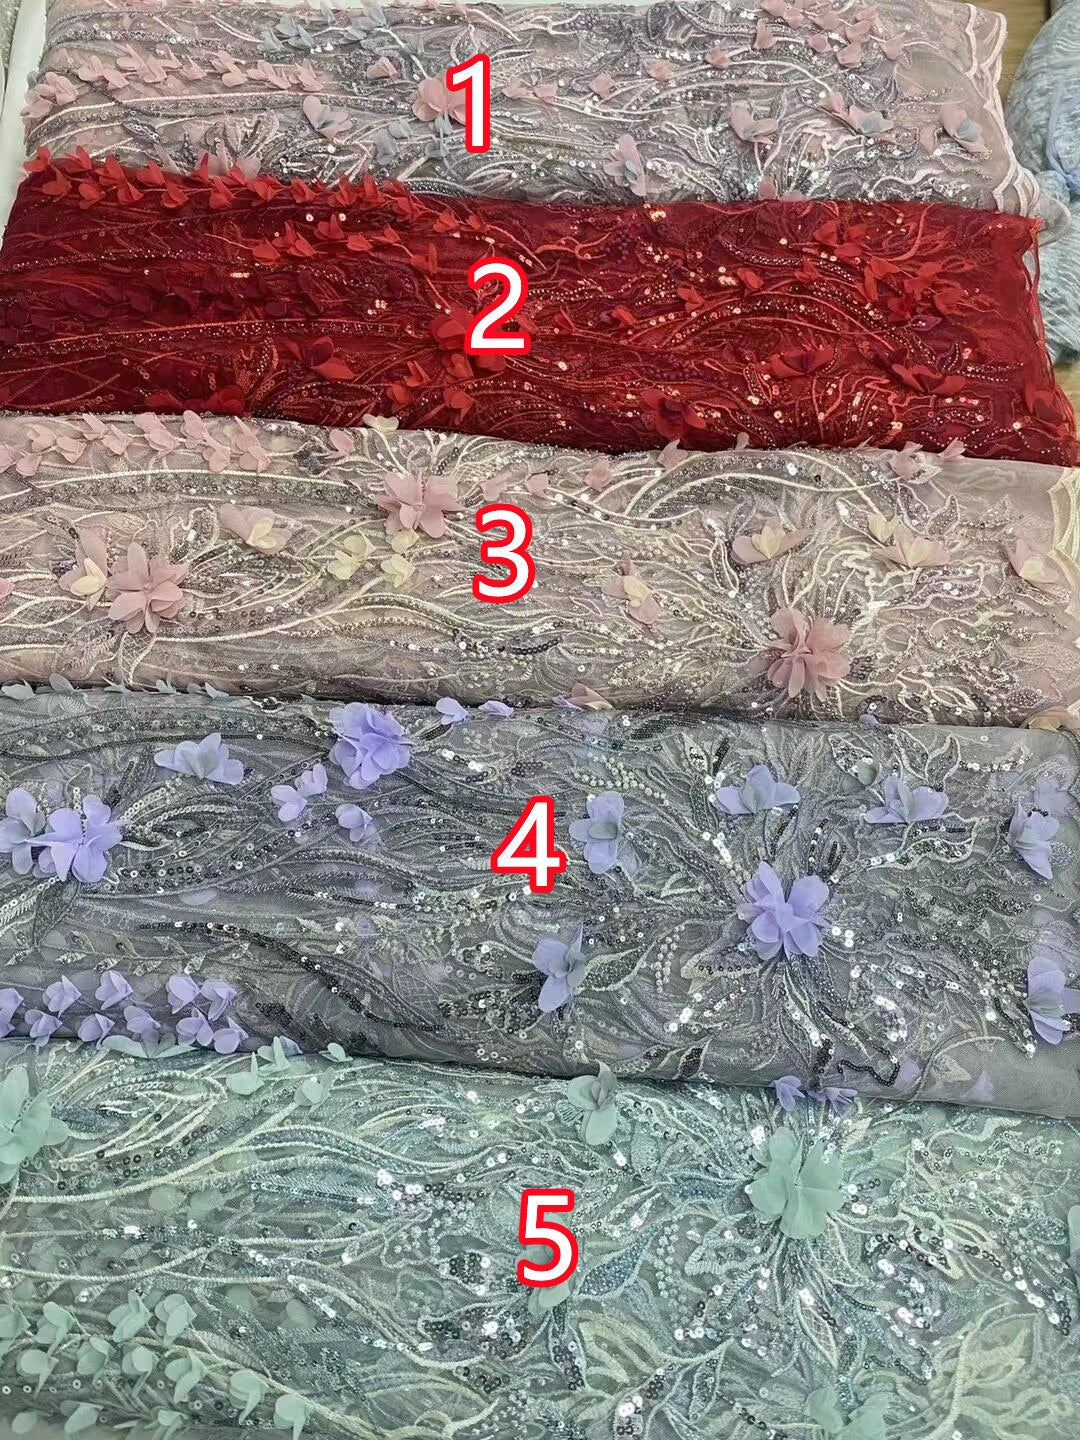 5 YARDS / 5 COLORS / Surreal Floral Embroidery Tulle Mesh Sequin Lace Fabric - Classic & Modern